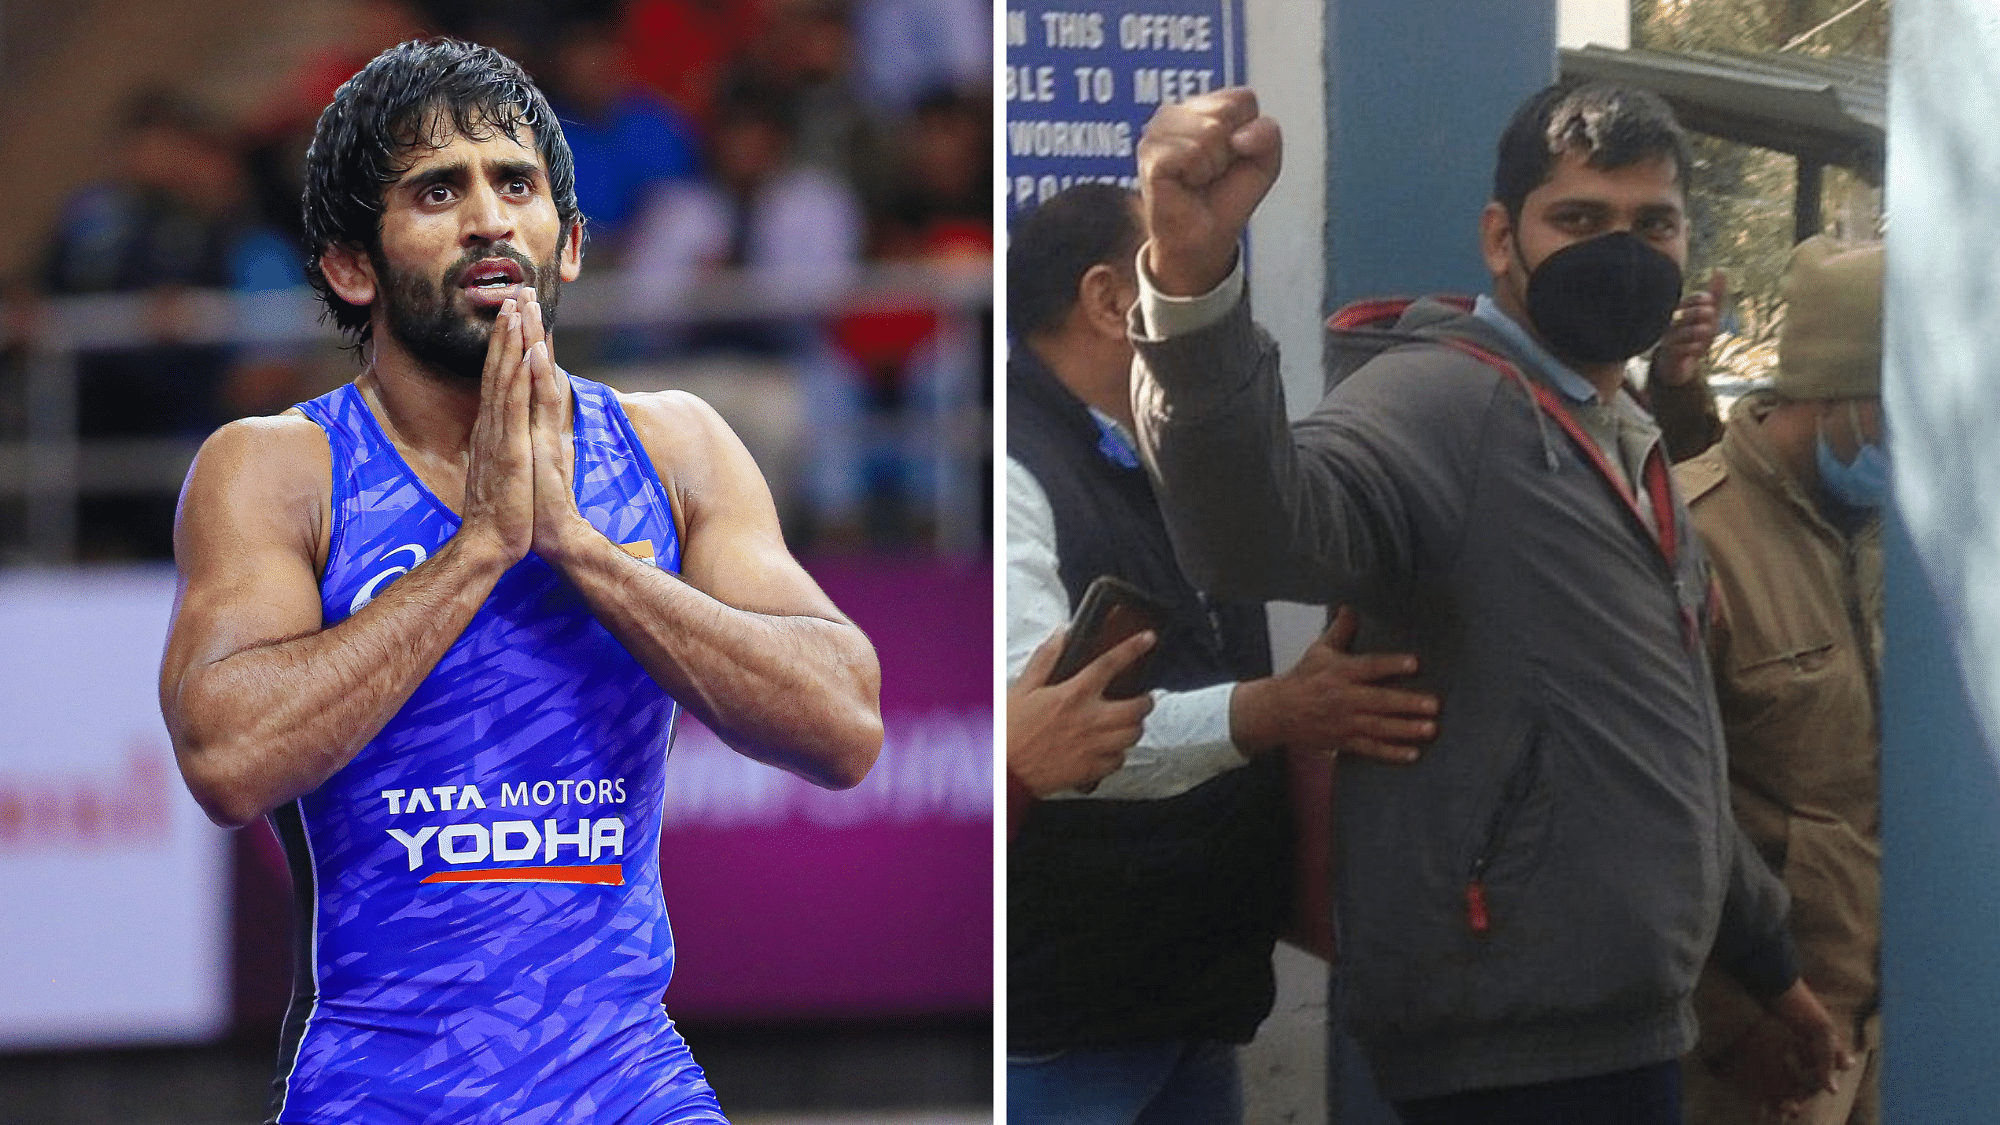 Indian wrestler has questioned the arrest of journalist Mandeep Singh who was covering the farmers’ protest.